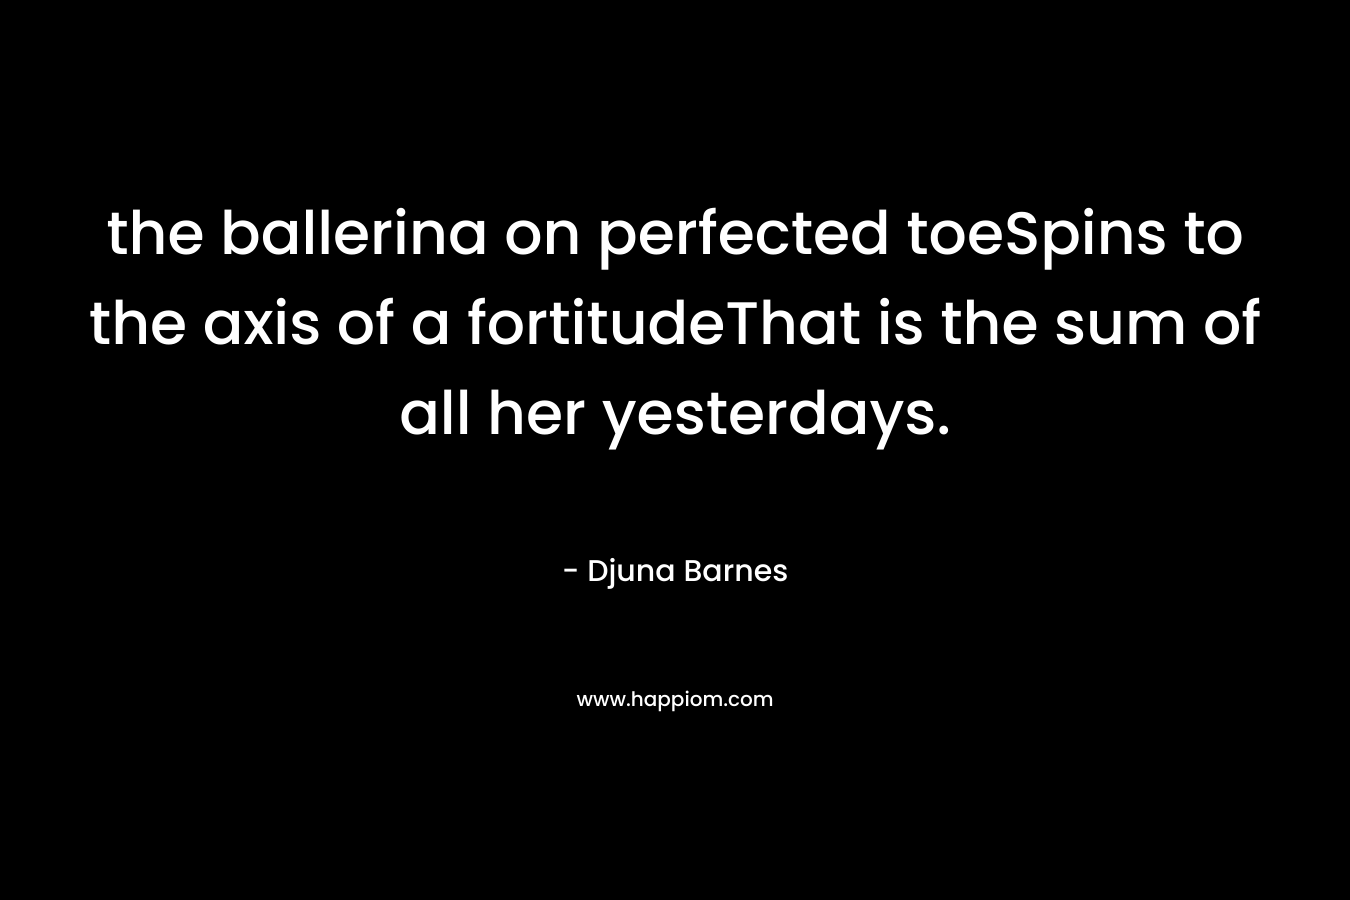 the ballerina on perfected toeSpins to the axis of a fortitudeThat is the sum of all her yesterdays.